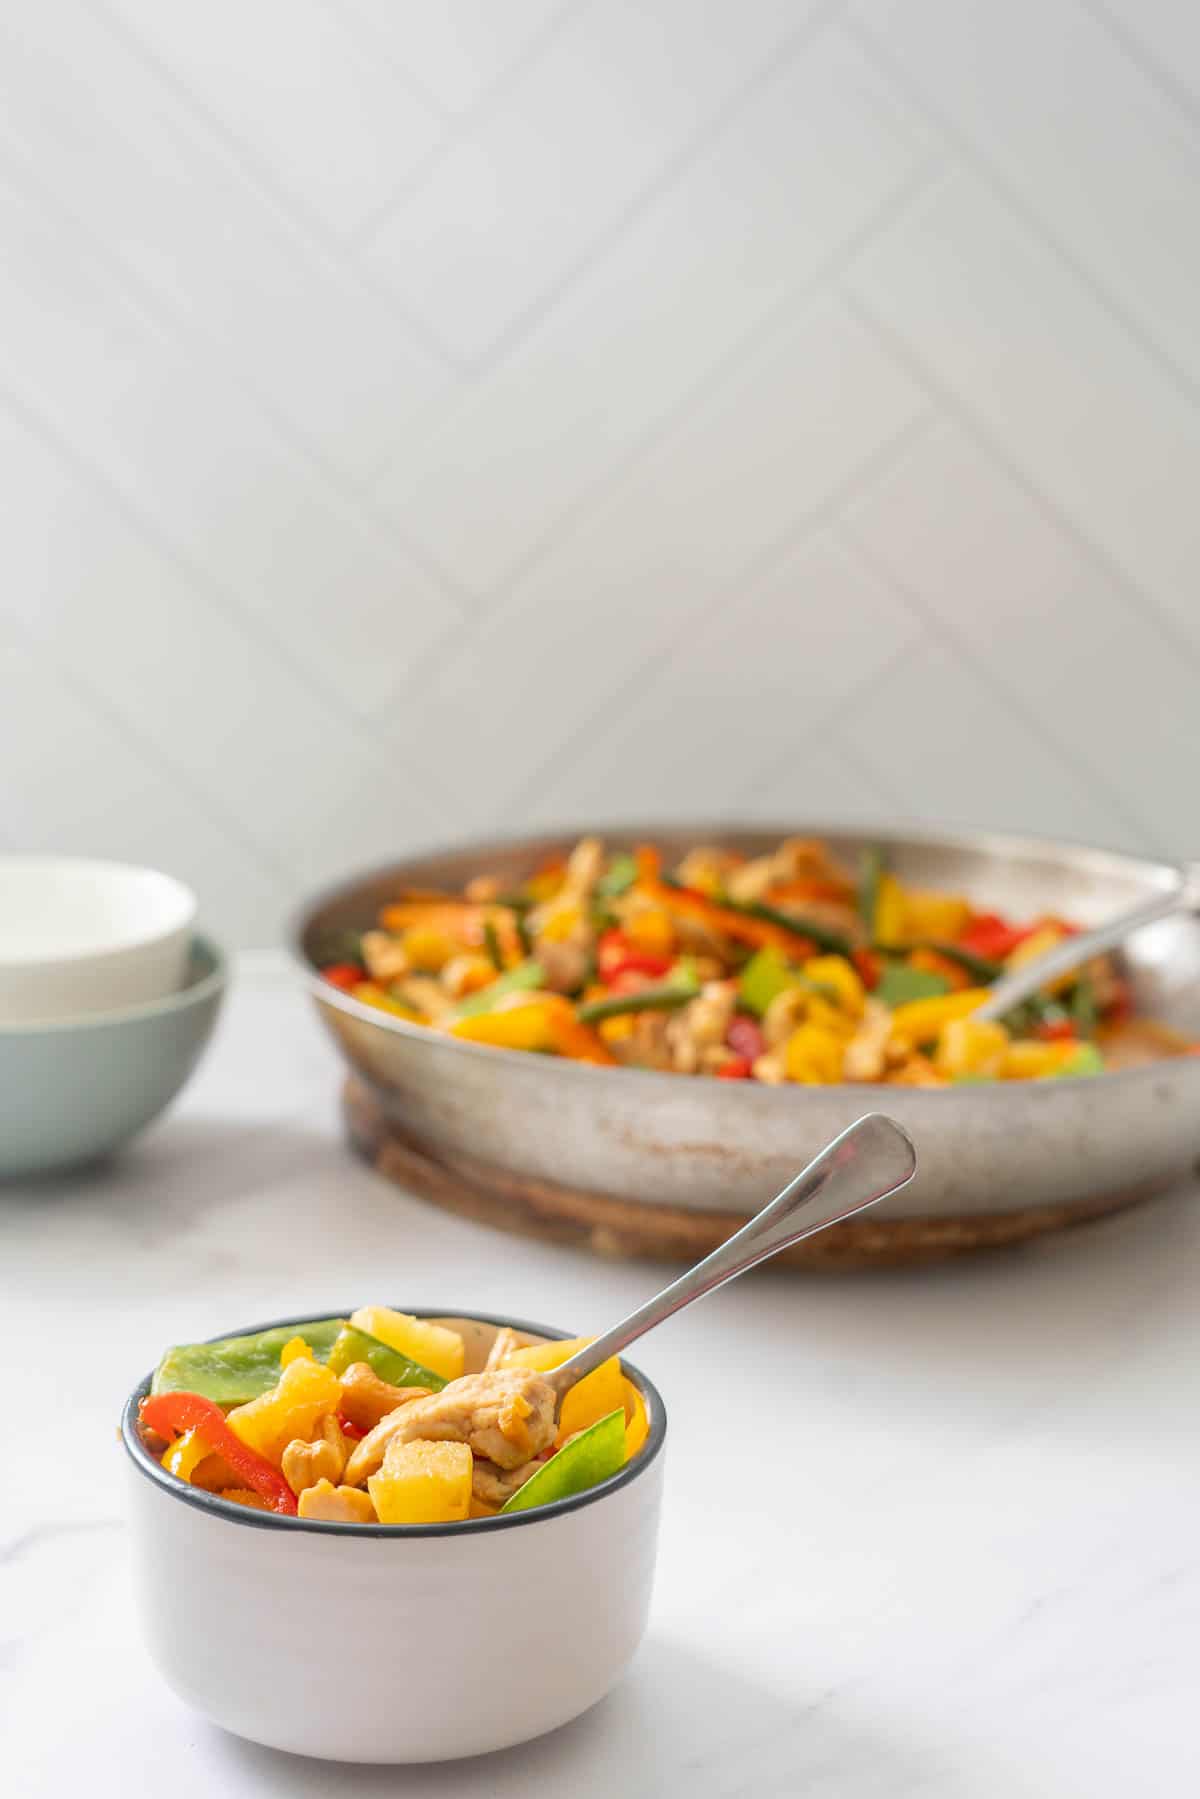 A small bowl of colourful chicken and vegetable stir fry sitting in front of a fry pan of more stir fry.